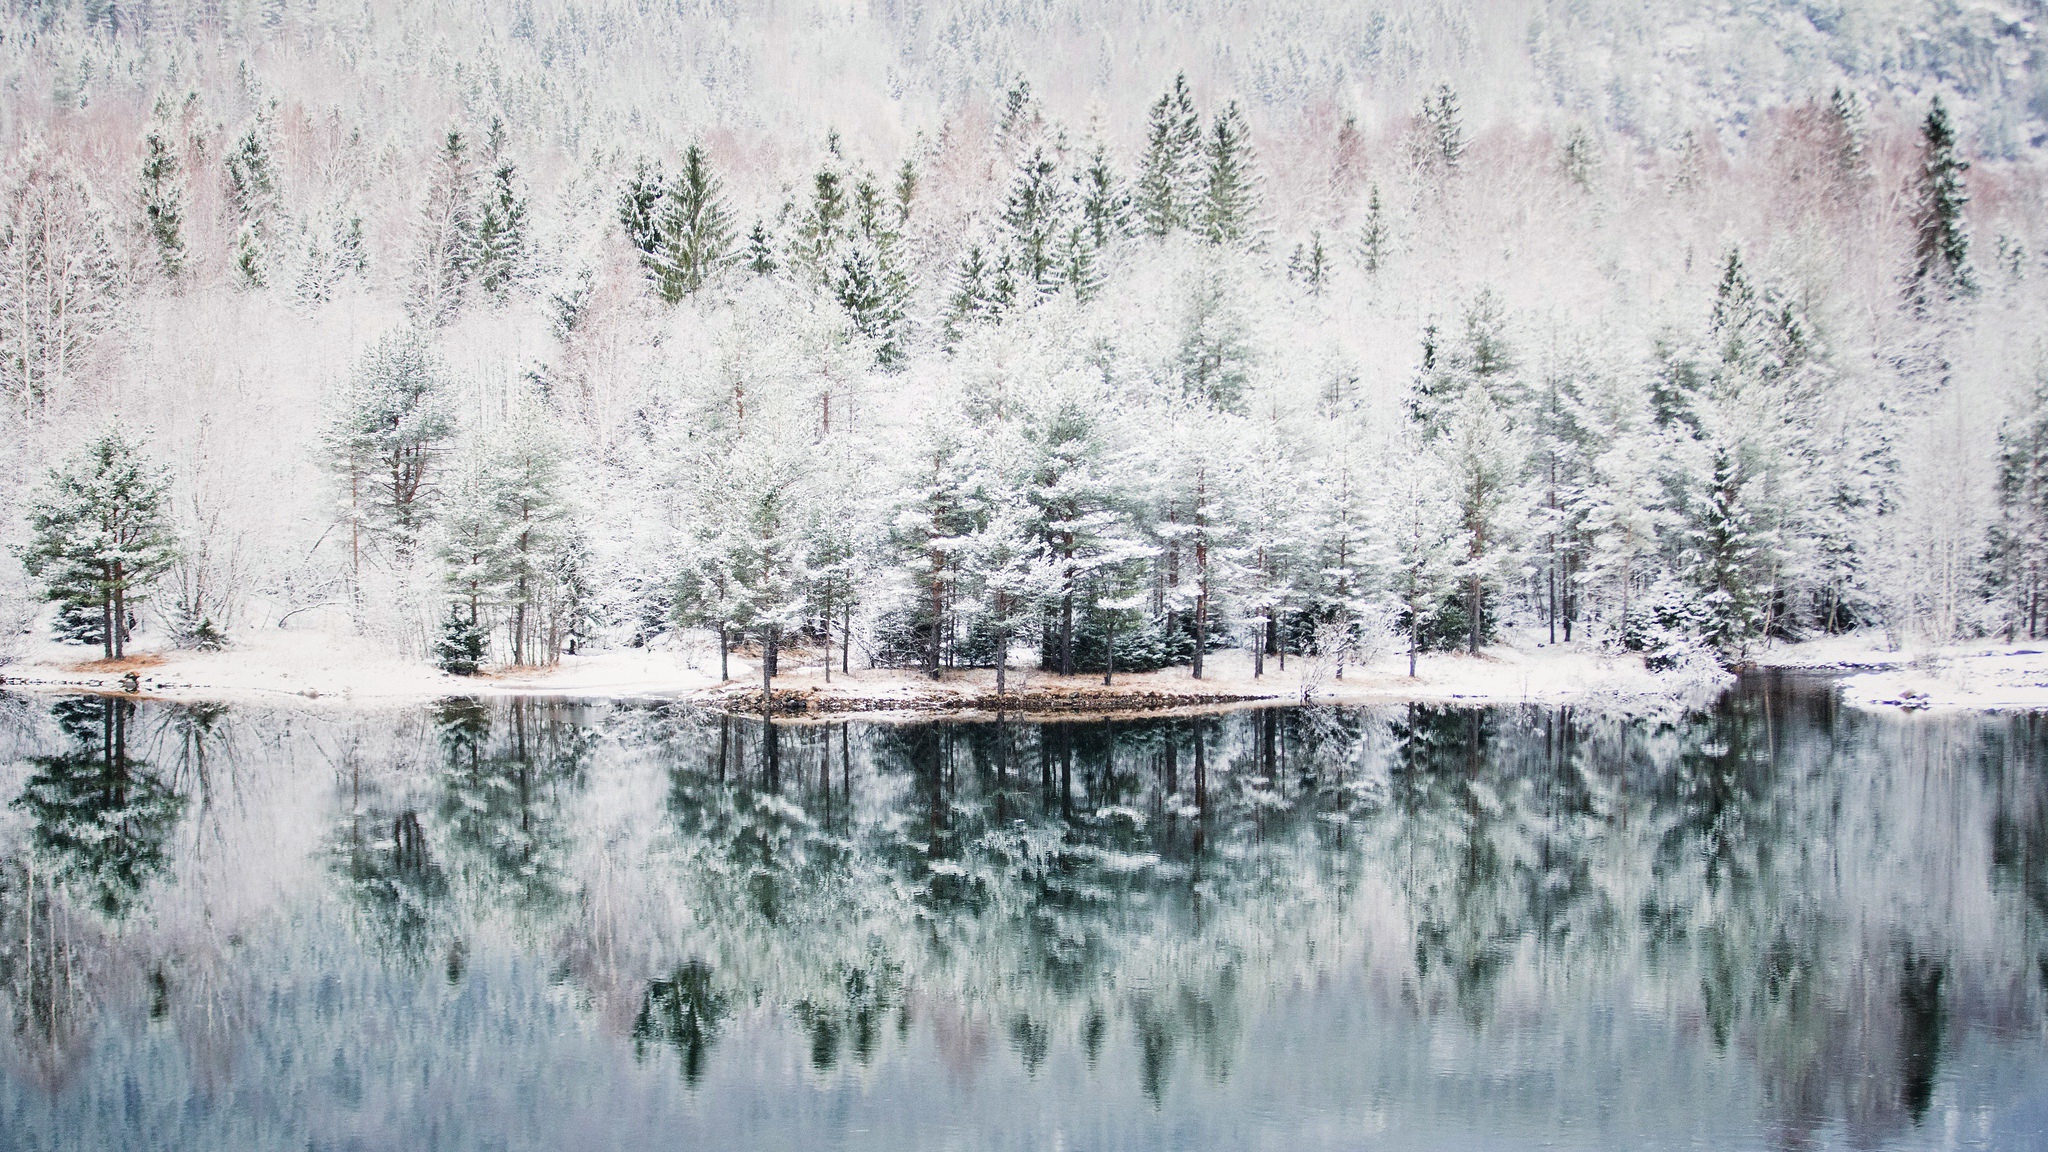 General 2048x1152 winter snow water reflection trees nature Norway bright